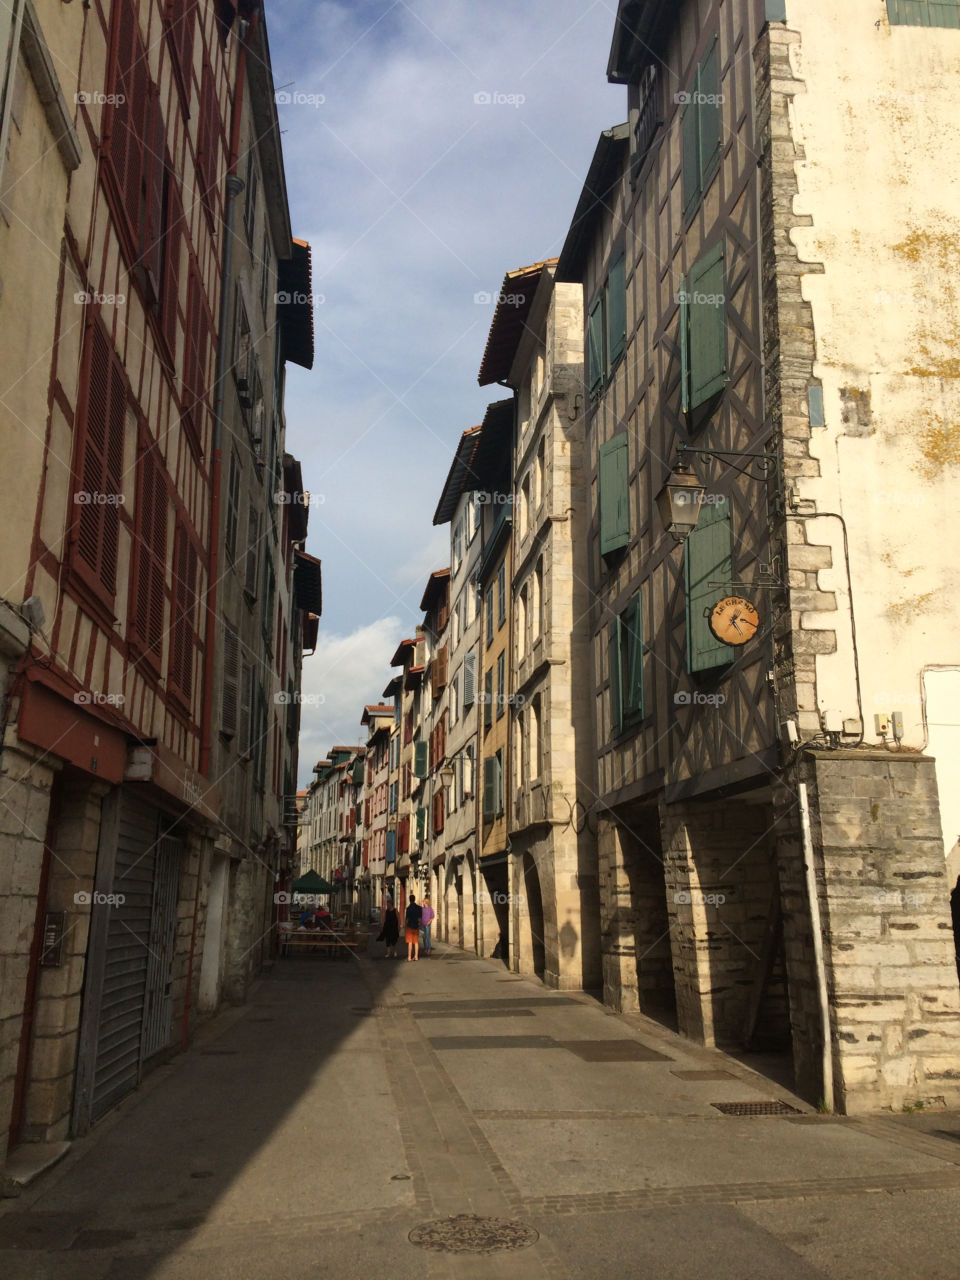 Building
View
France
Pays basque
Bayonne
Street
